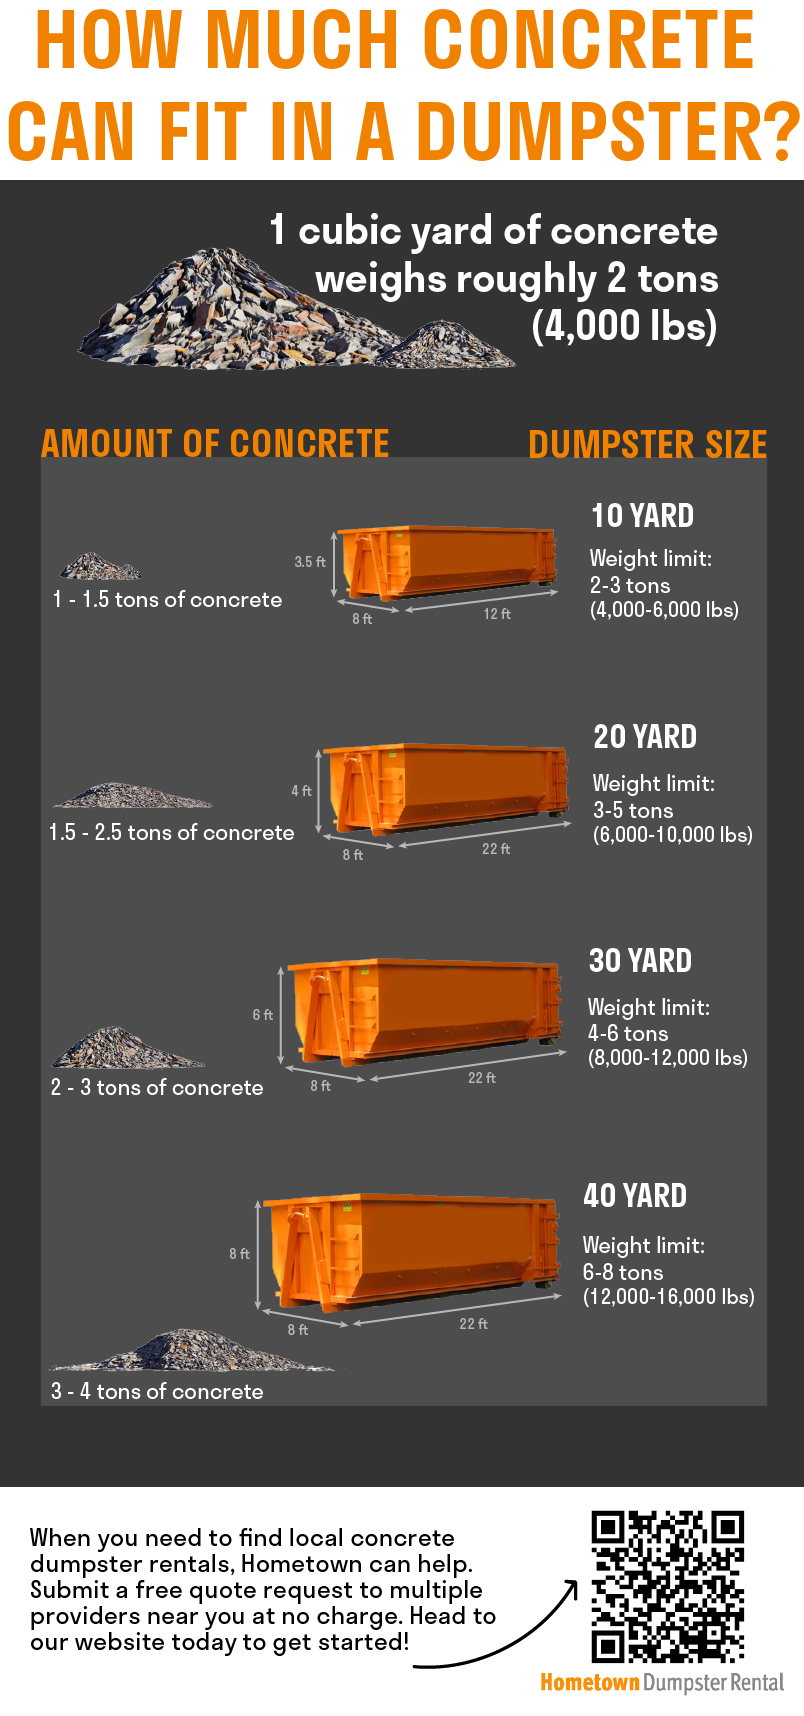 How Much Concrete Can Fit in a Dumpster? Infographic